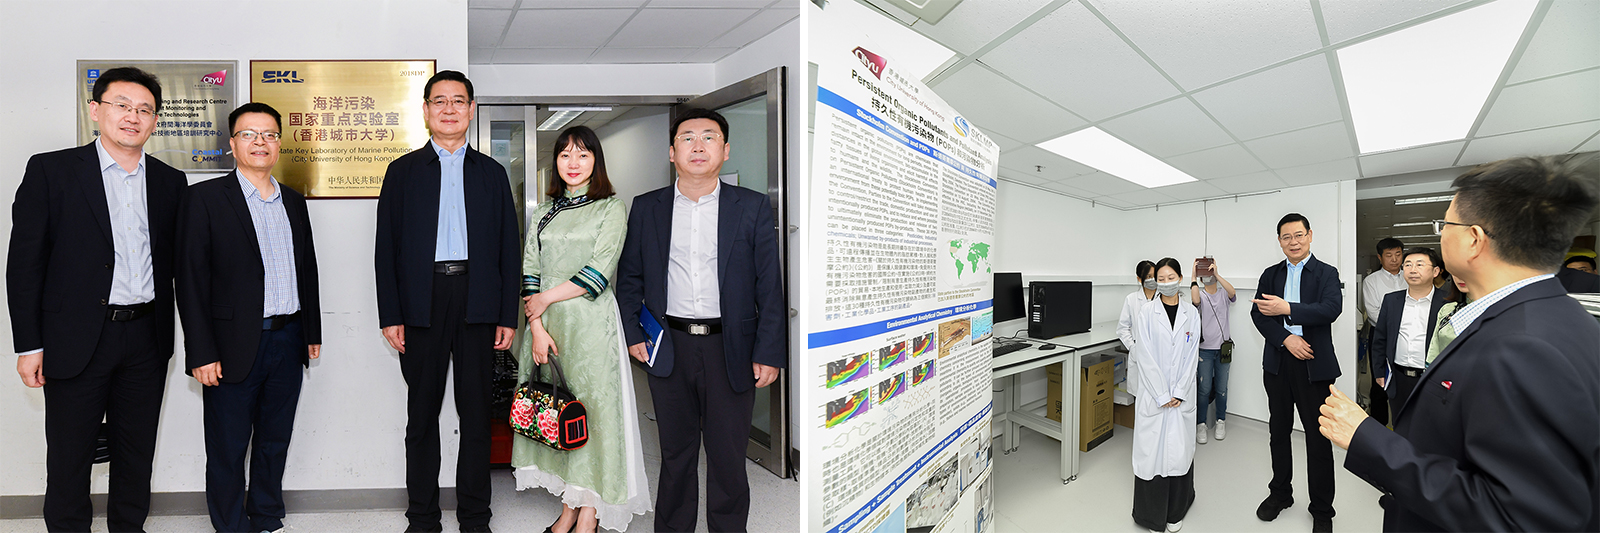 The delegation visit CityUHK’s State Key Laboratory of Marine Pollution (left) and the Time-Resolved Aberration-Corrected Environmental Electron Microscope Unit.